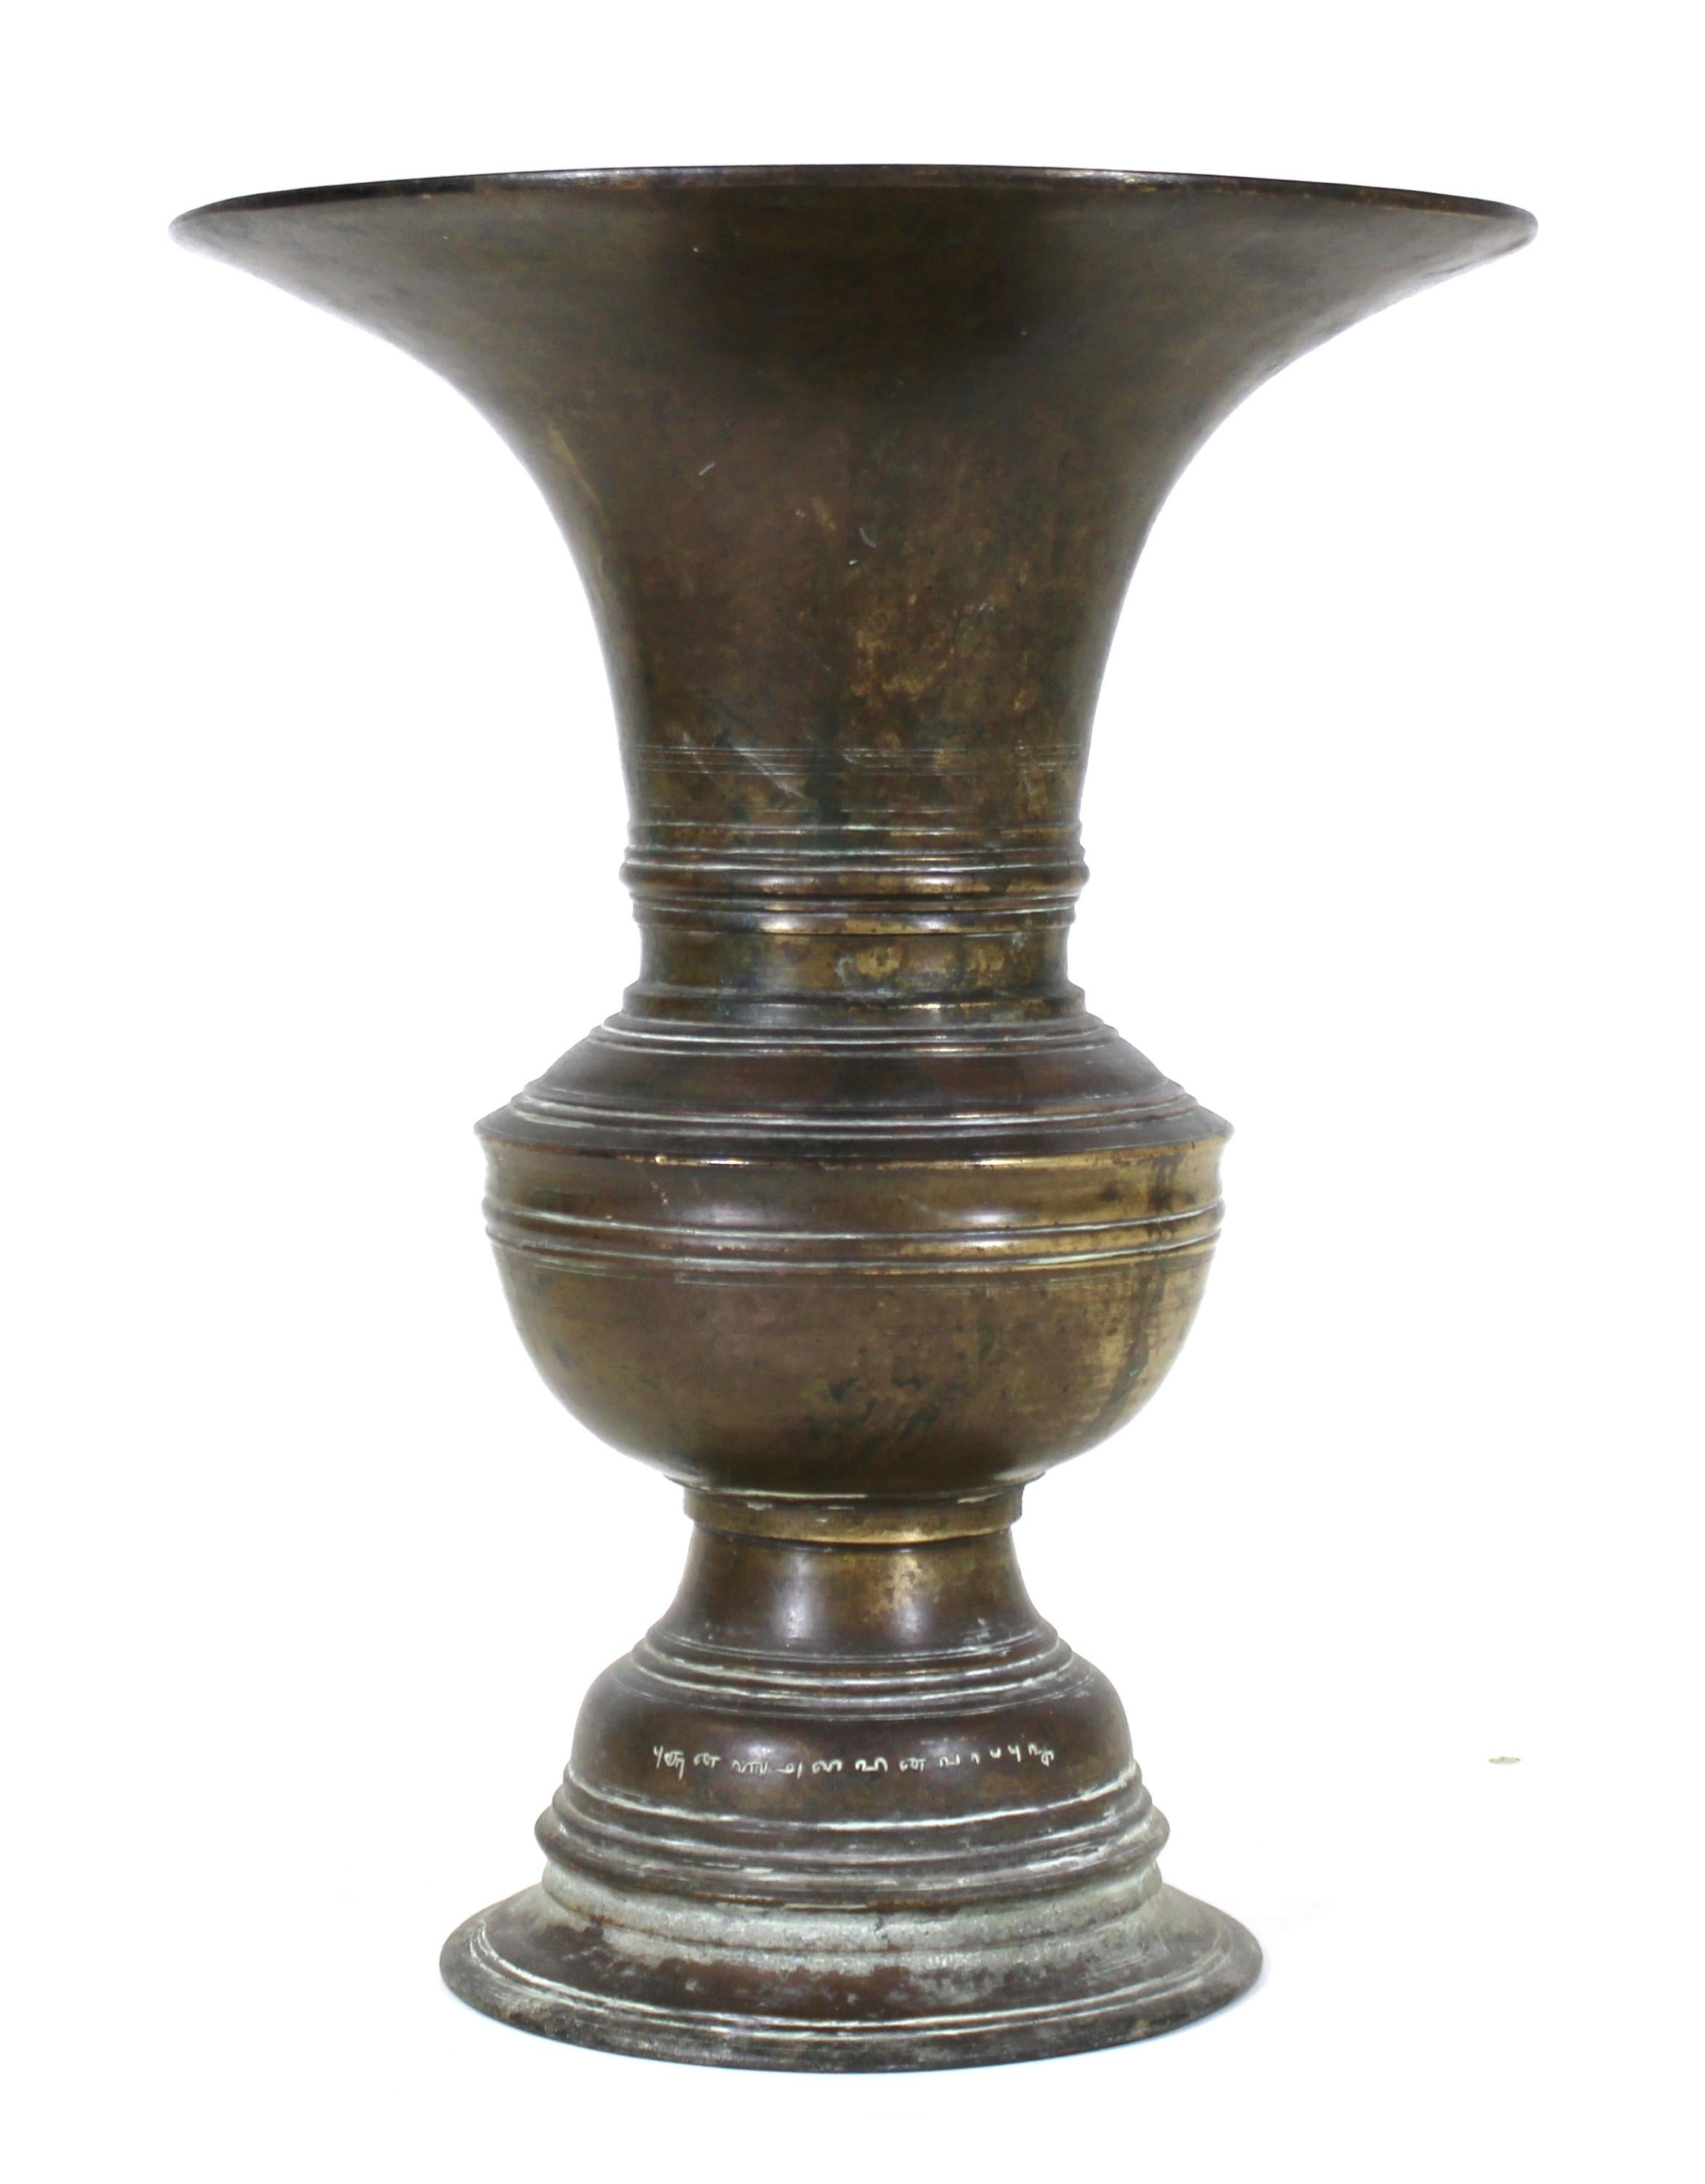 South Asian ceremonial bronze vessel with hammered inscription, possibly in a Tamil script. In great antique condition with age-appropriate wear and use.